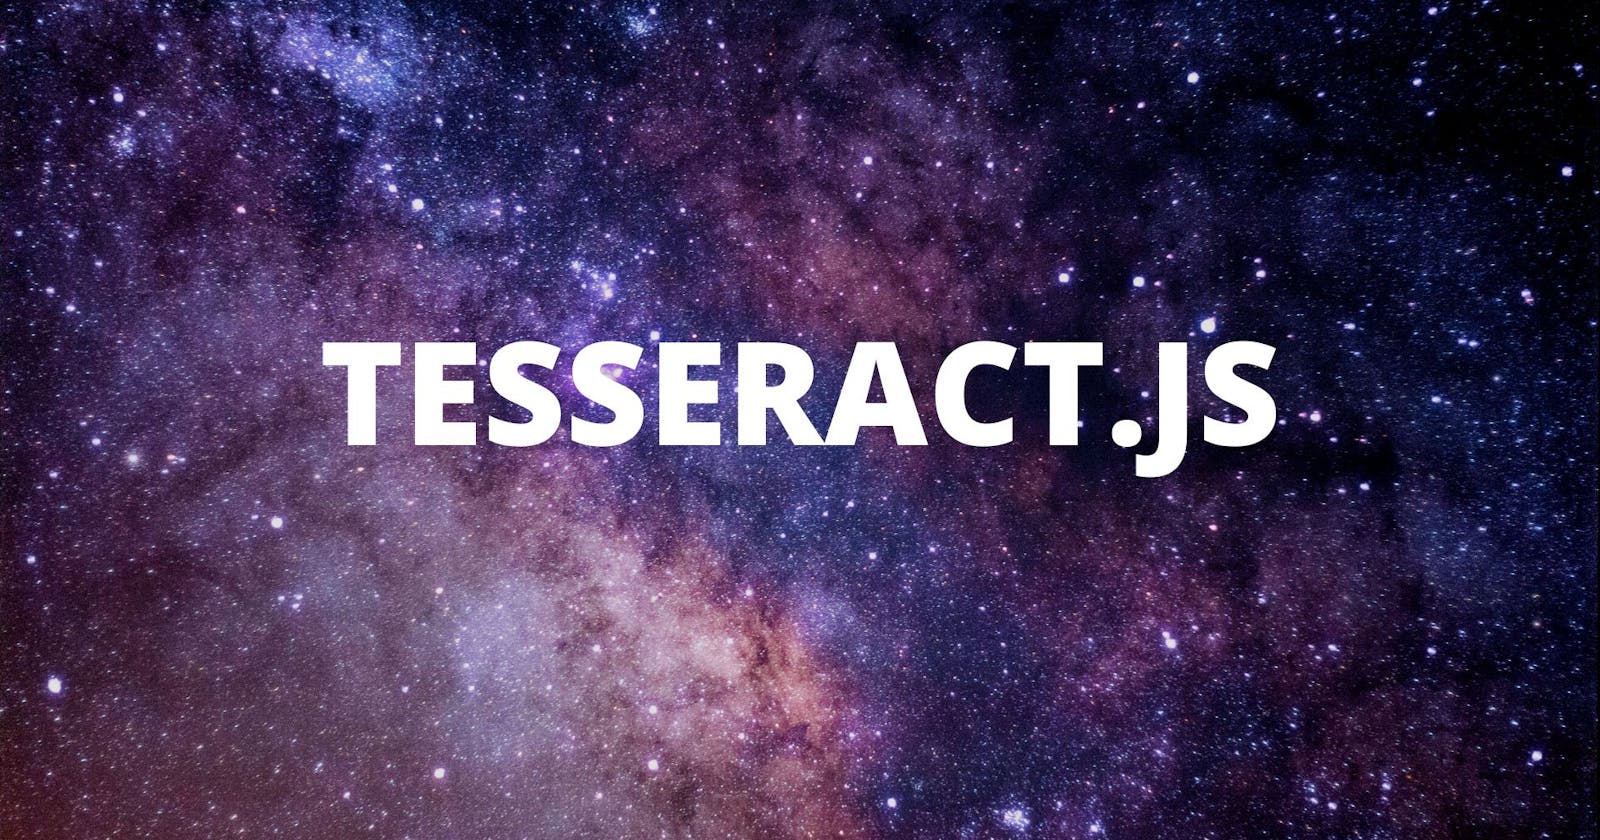 How to convert images to text with JavaScript using Tesseract.js